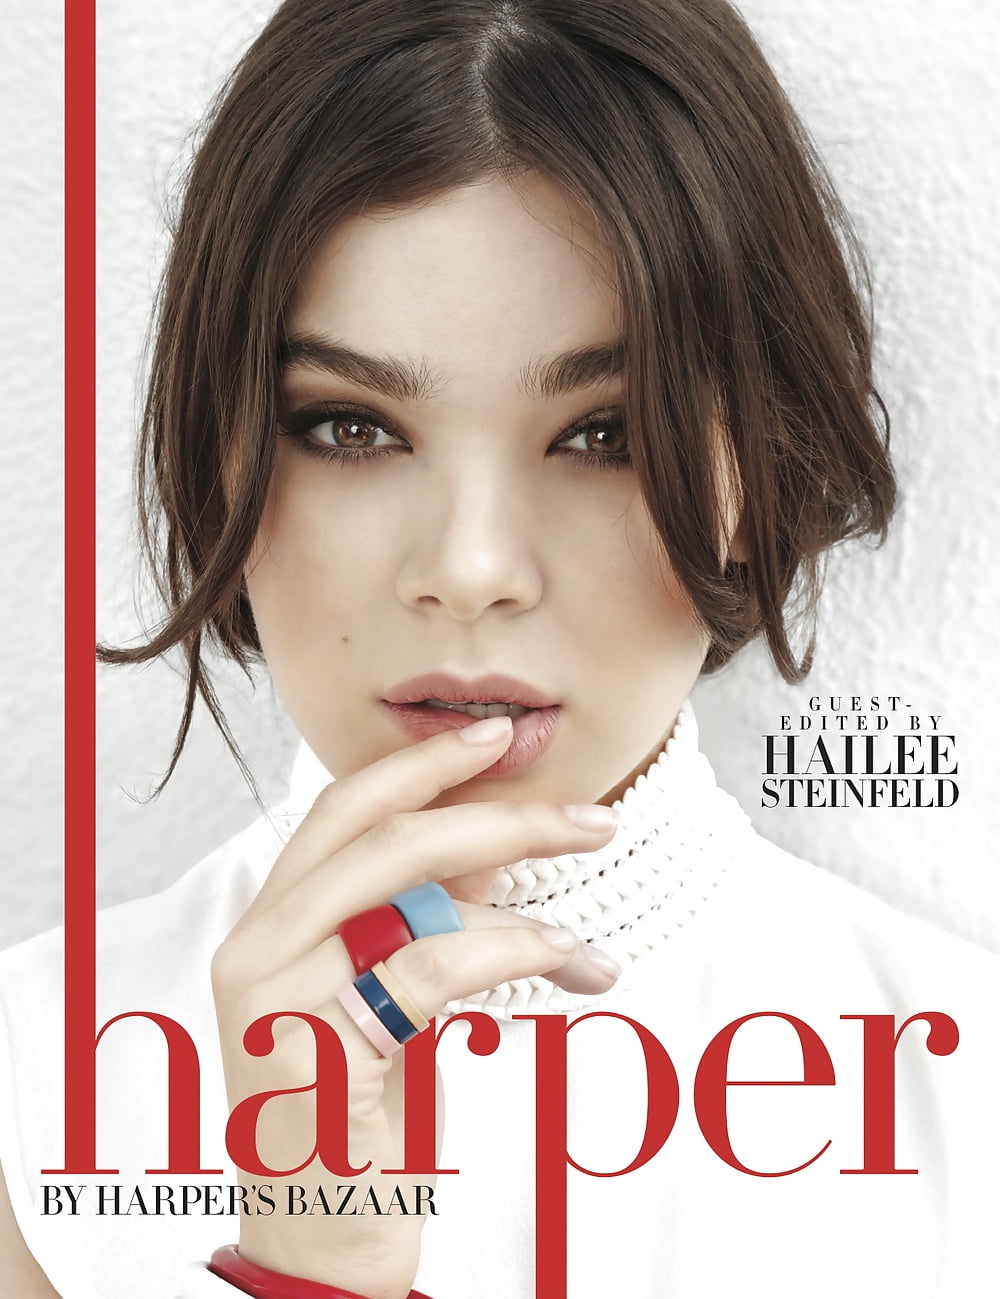 Bazaarporn - See and Save As hailee steinfeld harpers bazaar porn pict - 4crot.com